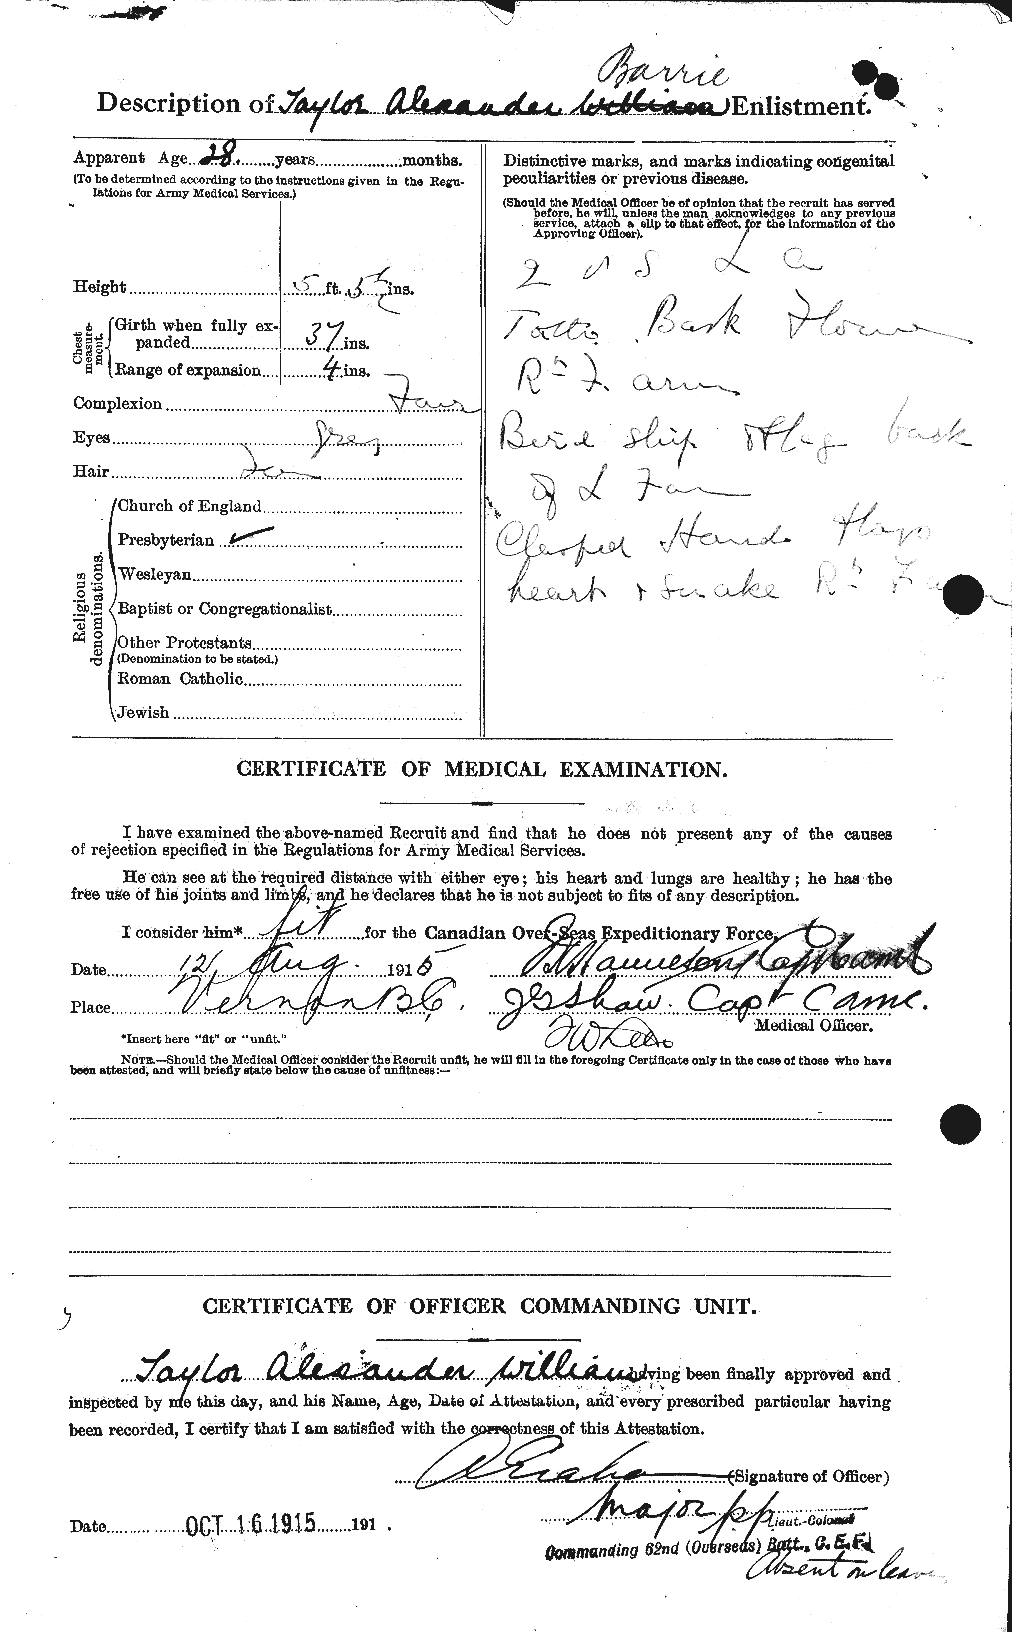 Personnel Records of the First World War - CEF 626151b